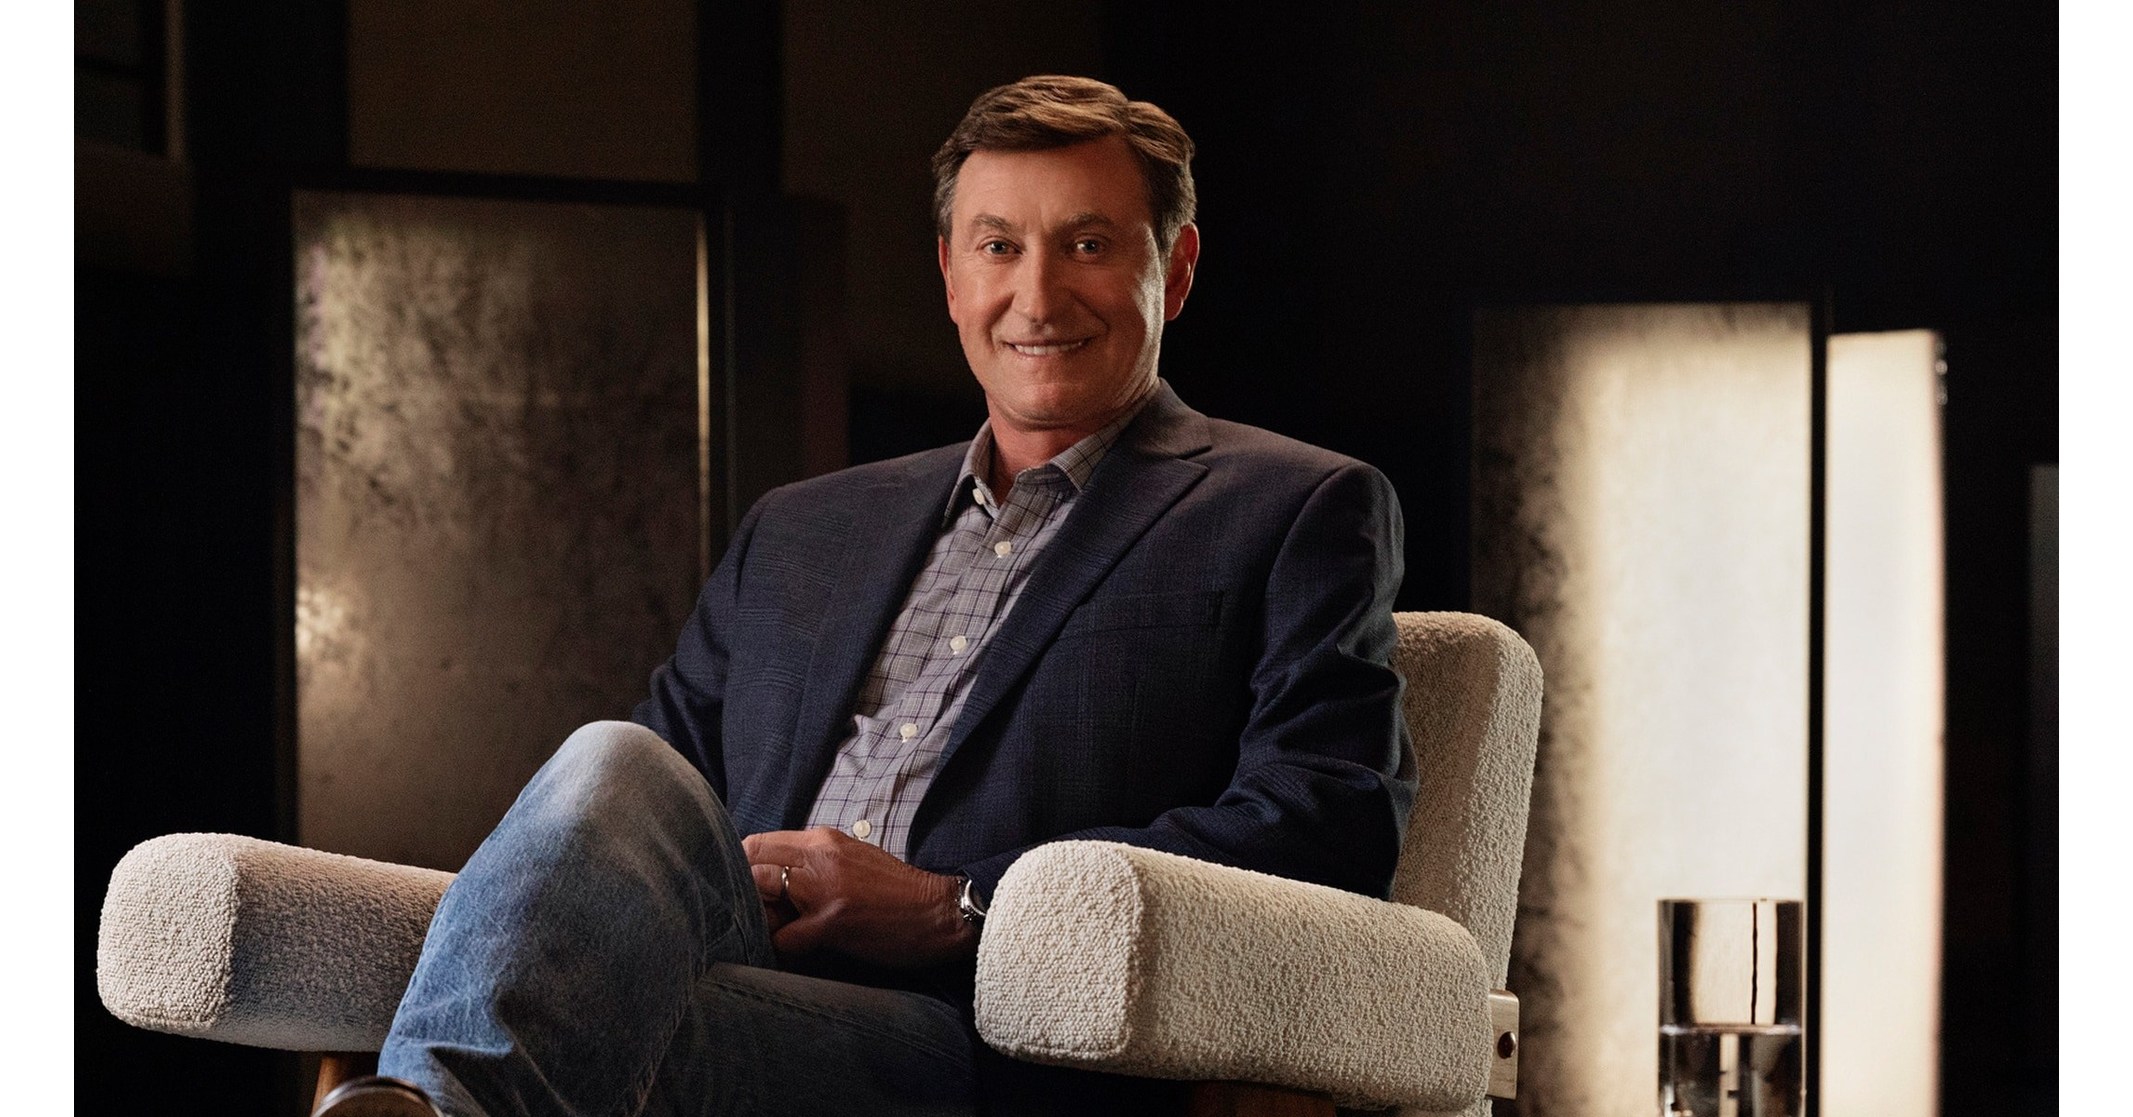 Wayne Gretzky thinks No. 9 should be retired league-wide in honor